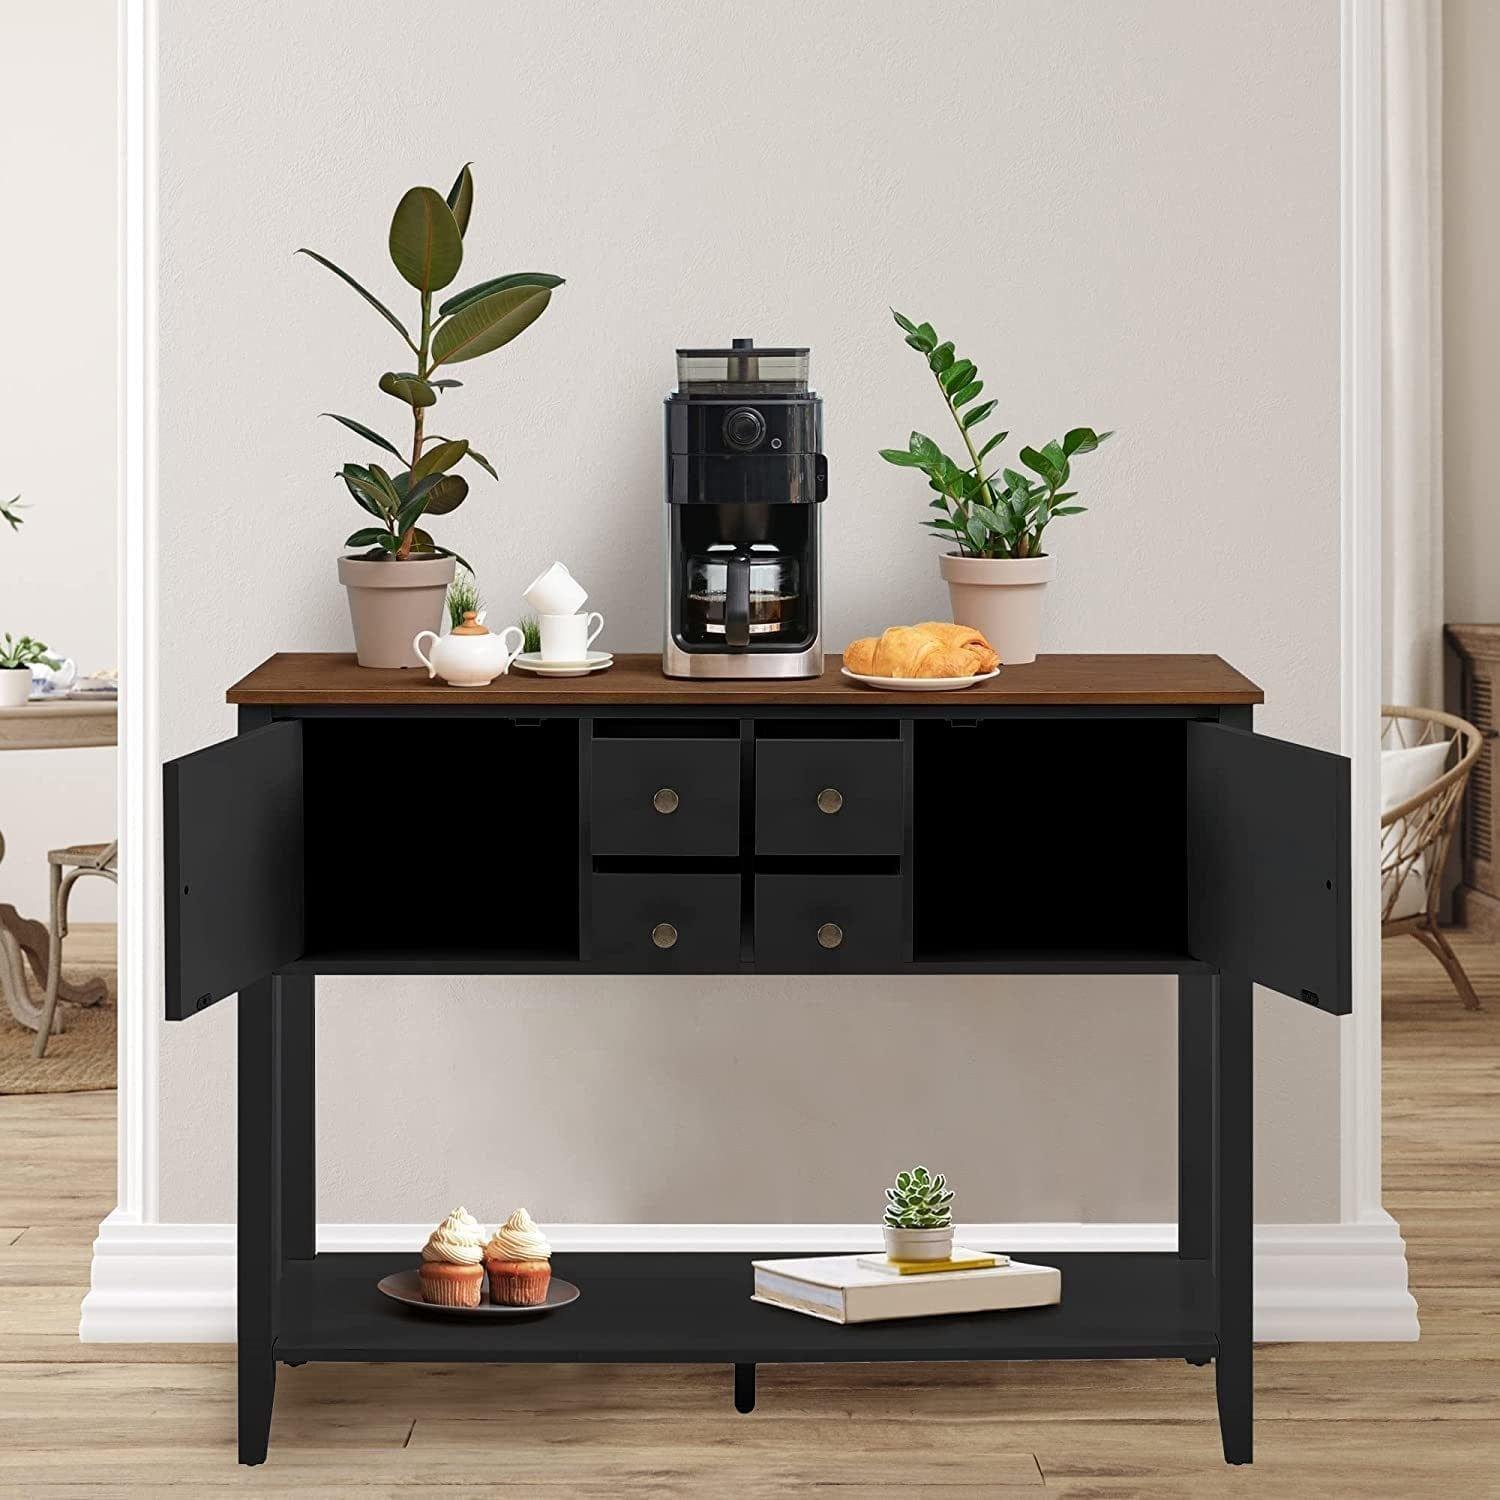 Shop Sideboard Buffet Storage Cabinet with Storage Drawers Storage Cabinets and Large Shelf Mademoiselle Home Decor